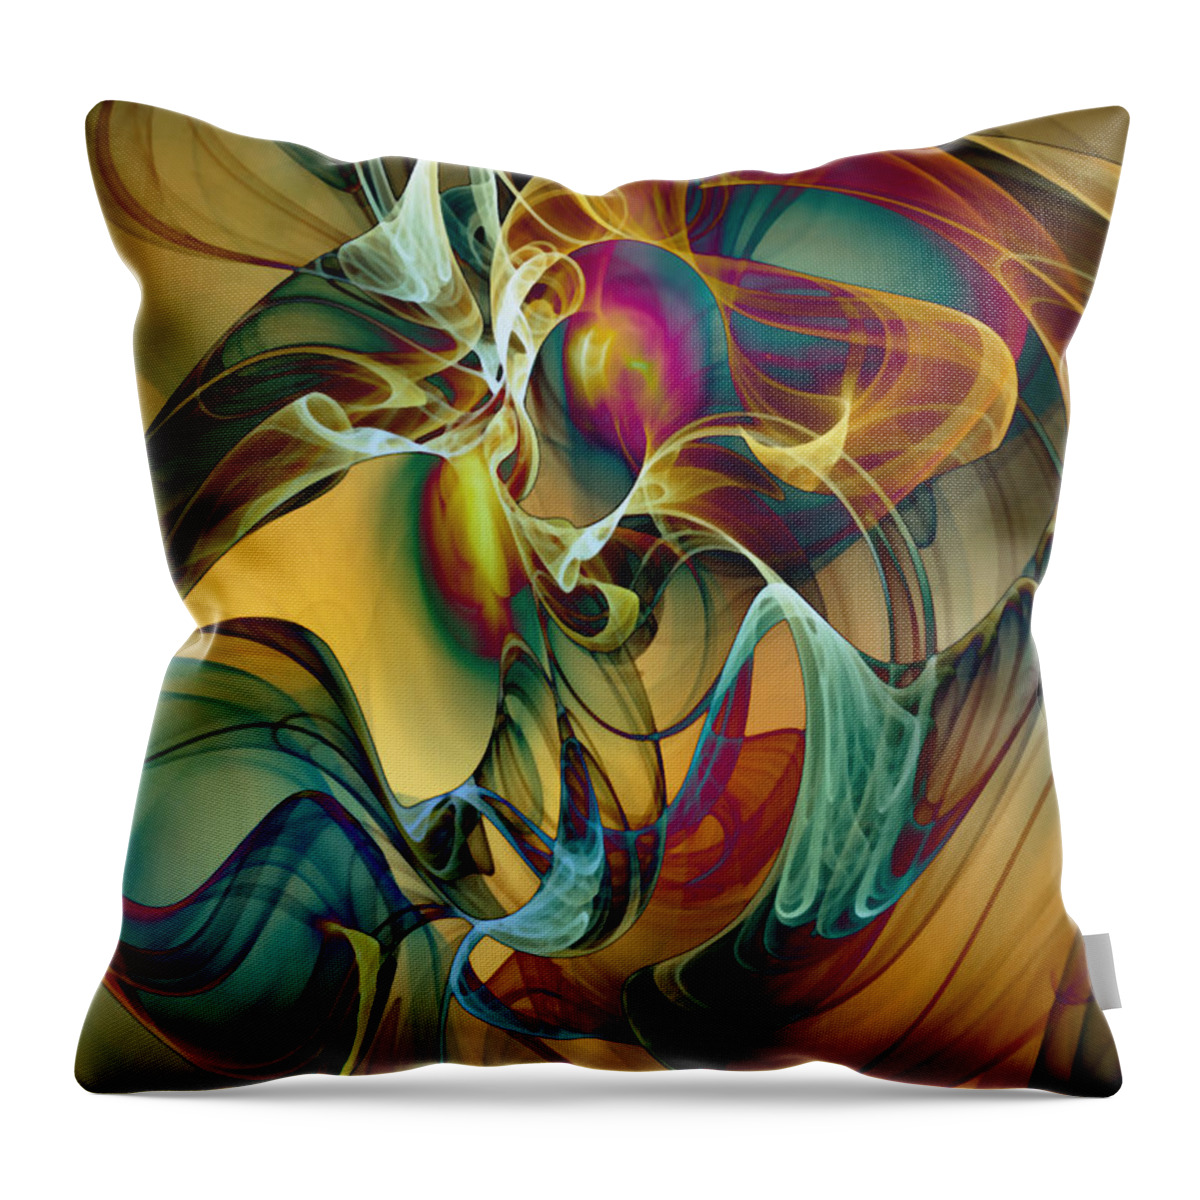 Wind Throw Pillow featuring the digital art Picked up by the Wind by Klara Acel